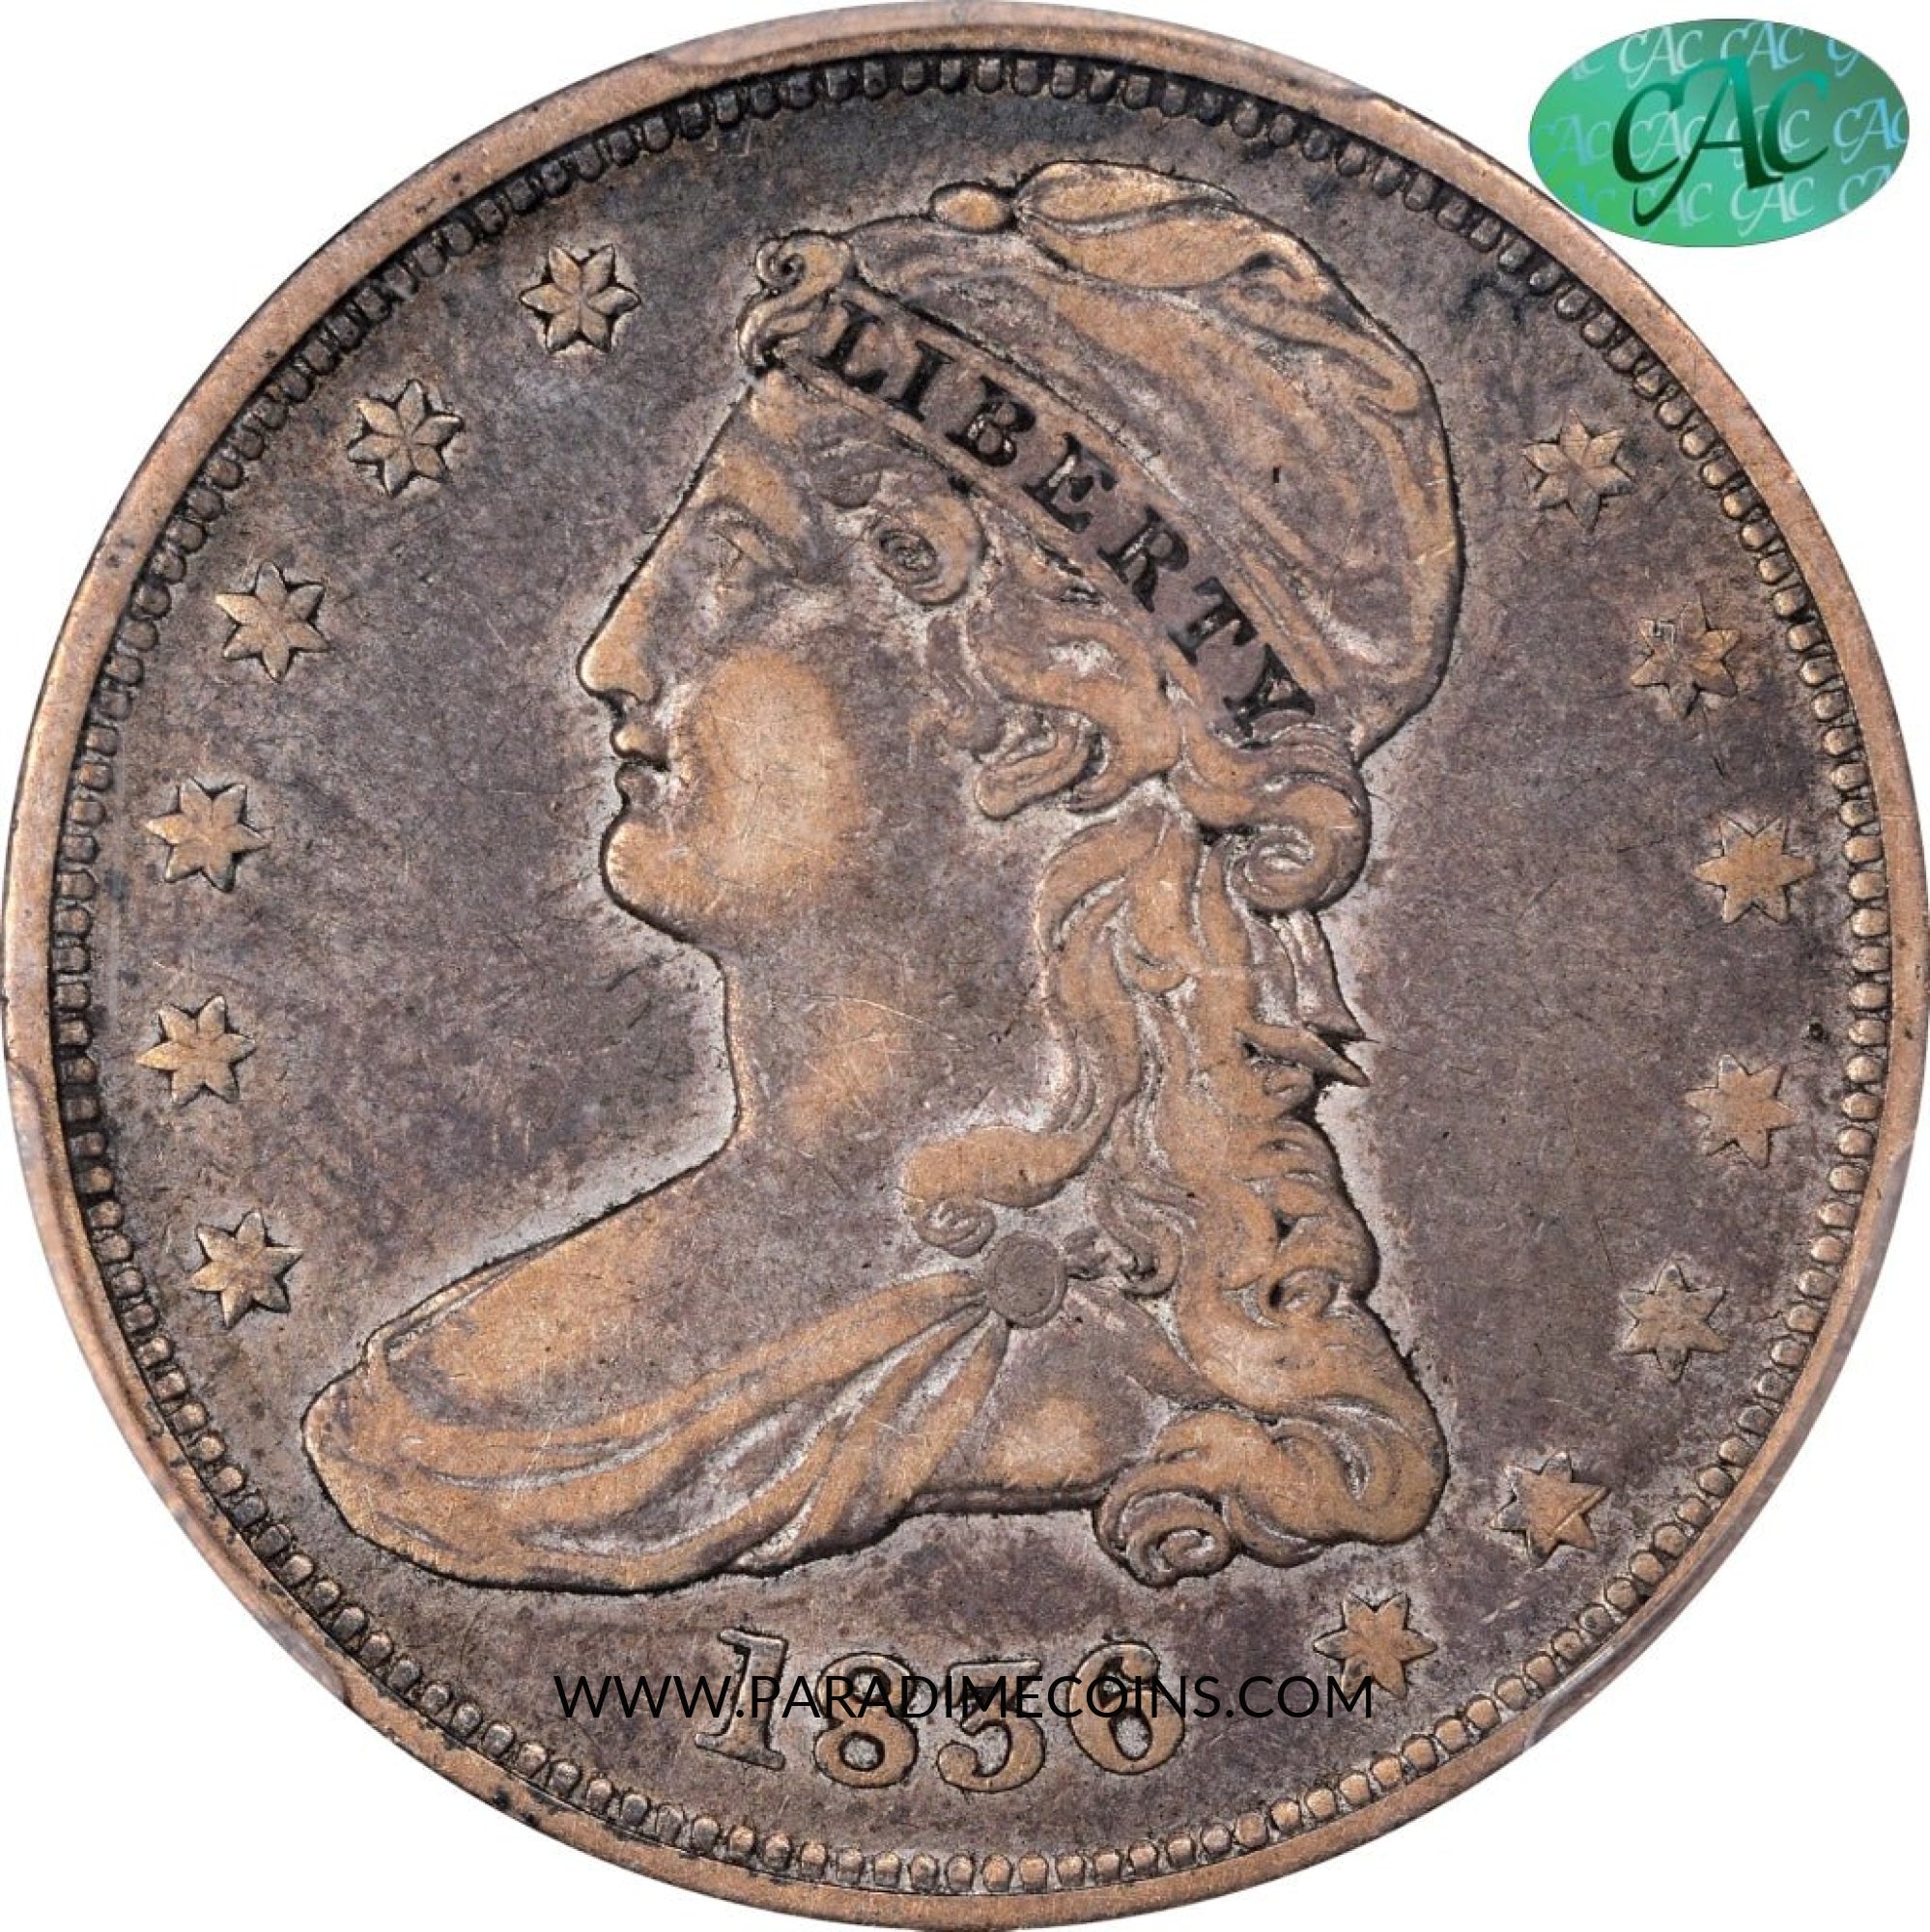 1836 50C REEDED EDGE VF20 PCGS CAC - Paradime Coins US Coins For Sale